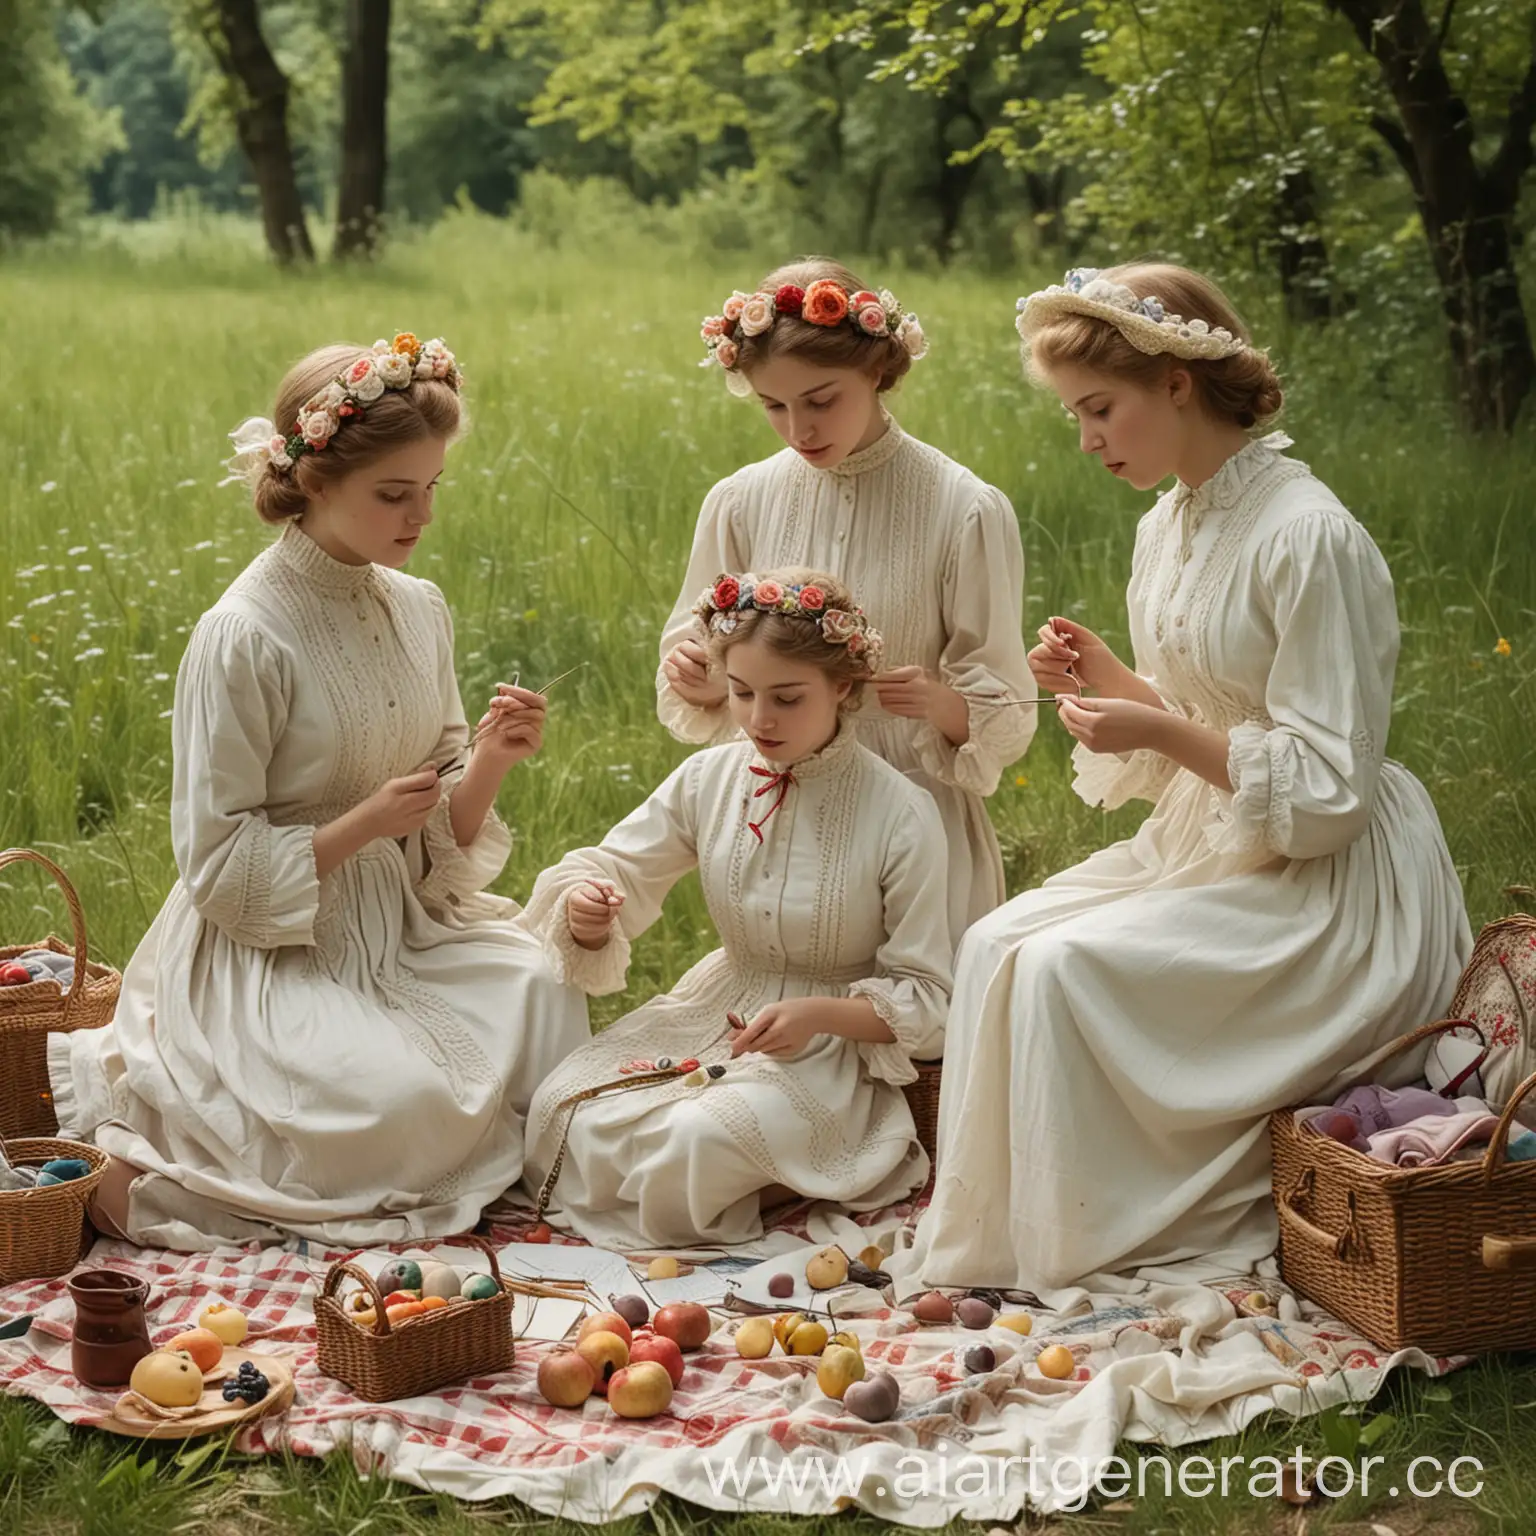 Aristocratic-Young-Ladies-Enjoying-Arts-and-Crafts-on-a-Nature-Picnic